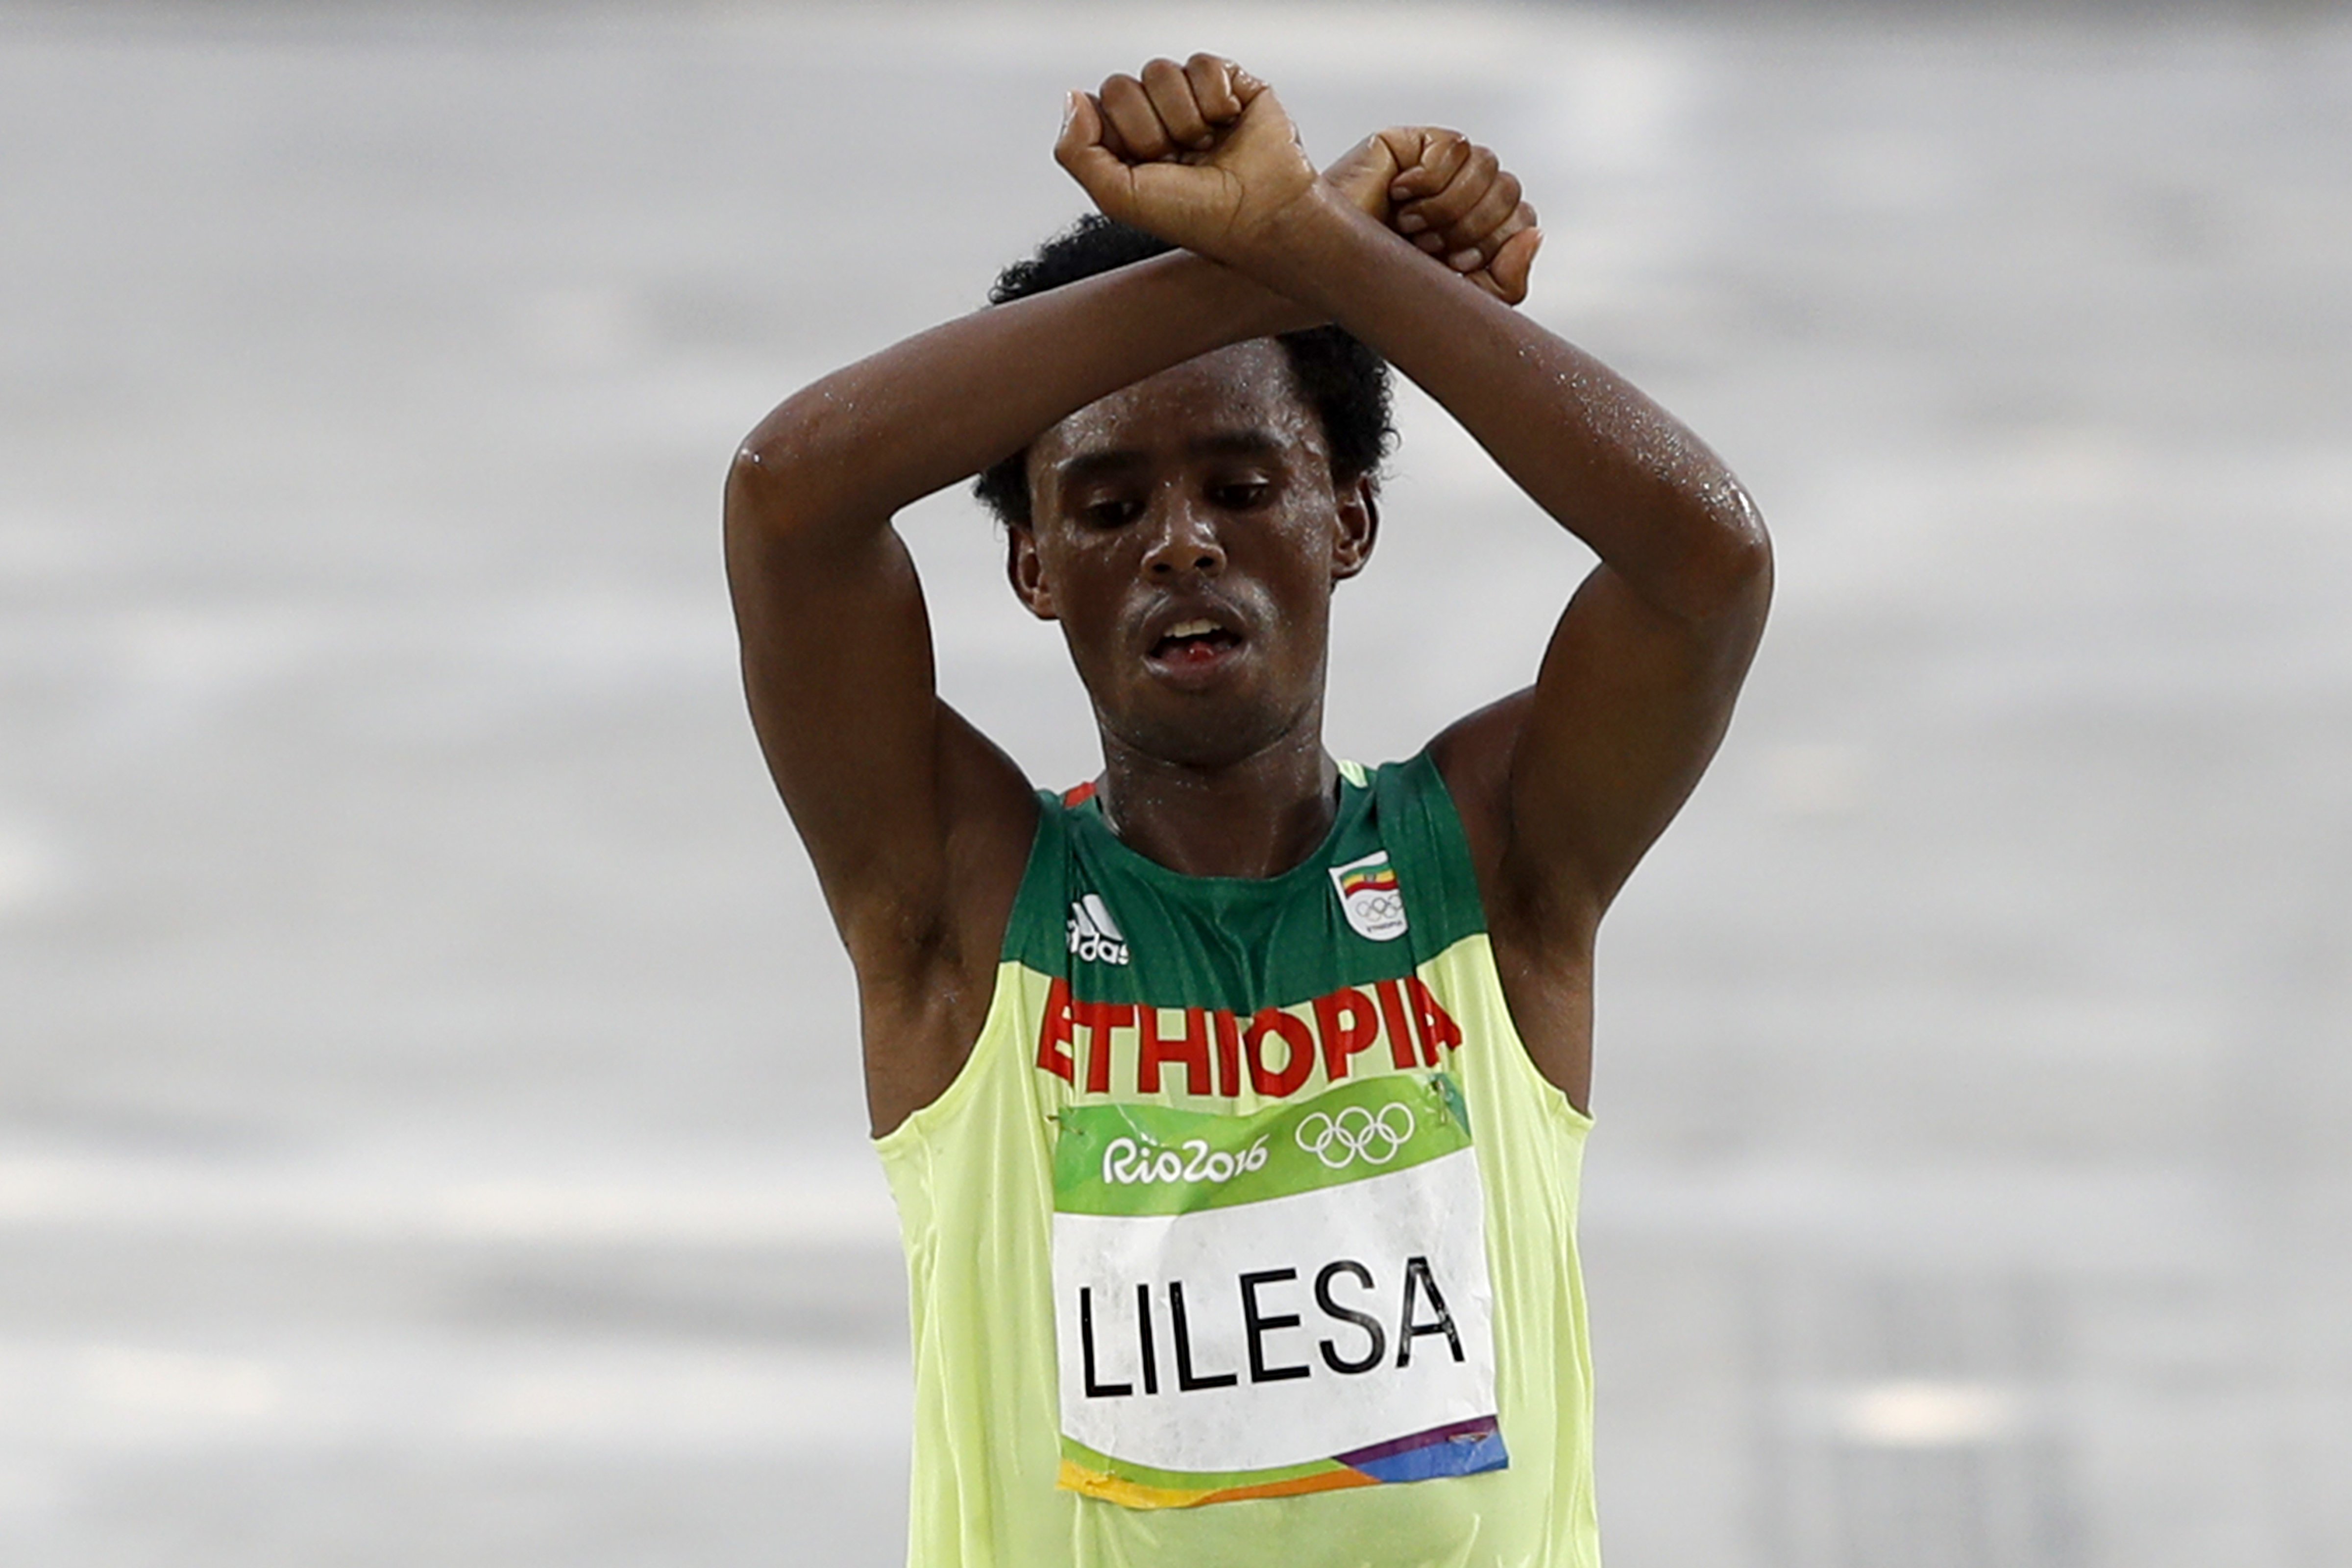 Ethiopia's Feyisa Lilesa (silver) crosses the finish line of the Men's Marathon athletics event during the Rio 2016 Olympic Games at the Sambodromo in Rio de Janeiro on August 21, 2016.  
                      Lilesa crossed his arms above his head as he finished the race as a protest against the Ethiopian government's crackdown on political dissent. (Adrian Dennis—AFP/Getty Images)